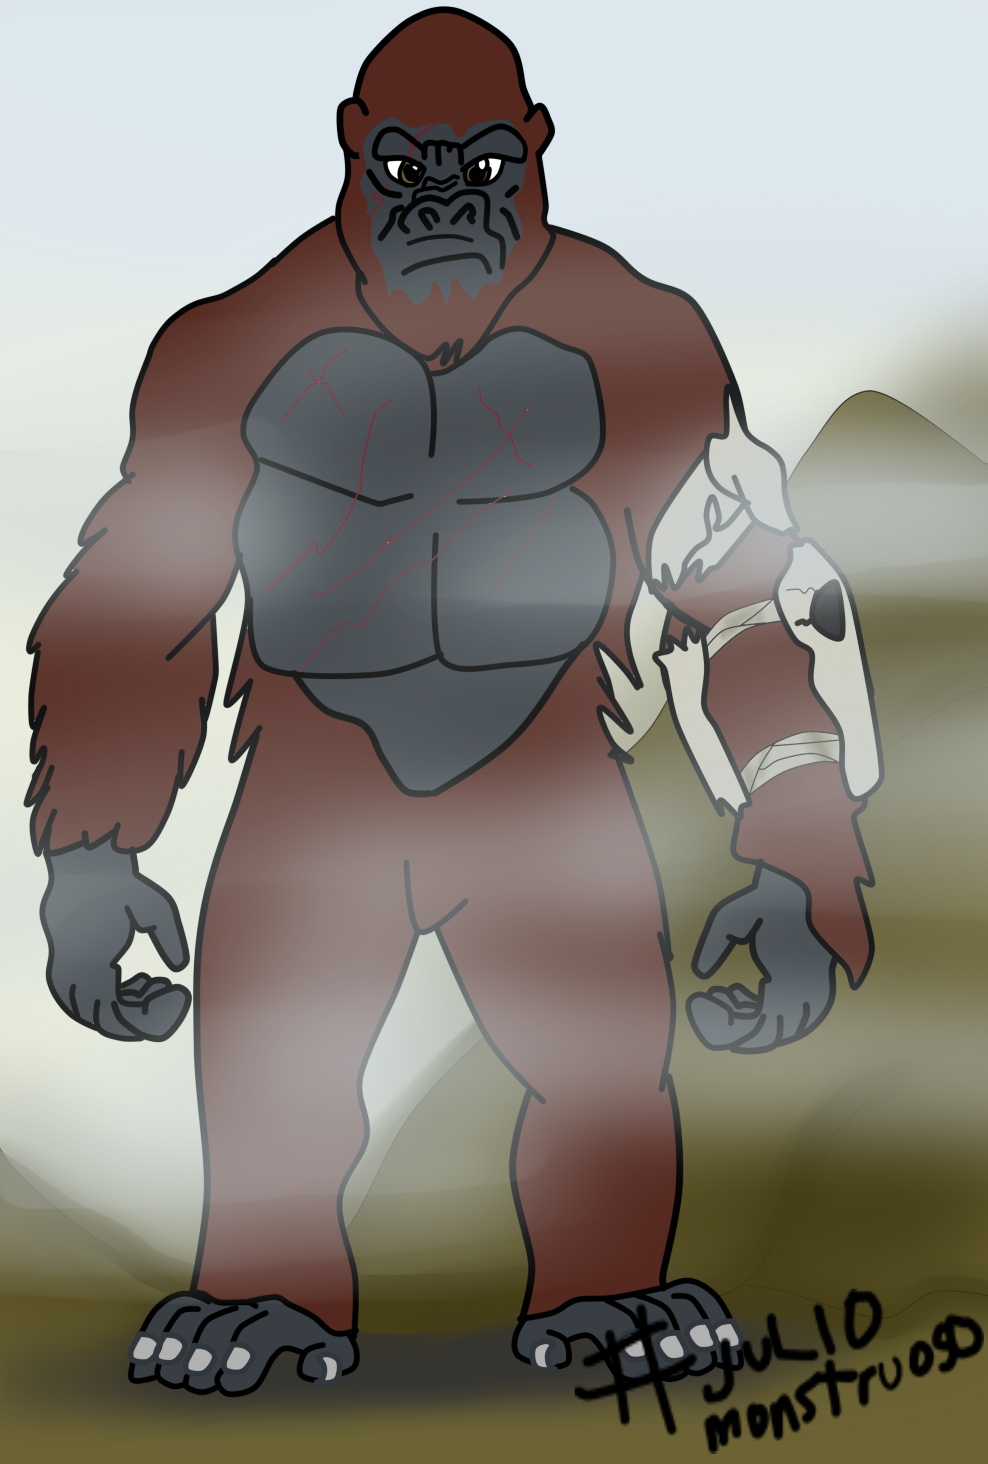 King Kong by gmaplay on DeviantArt